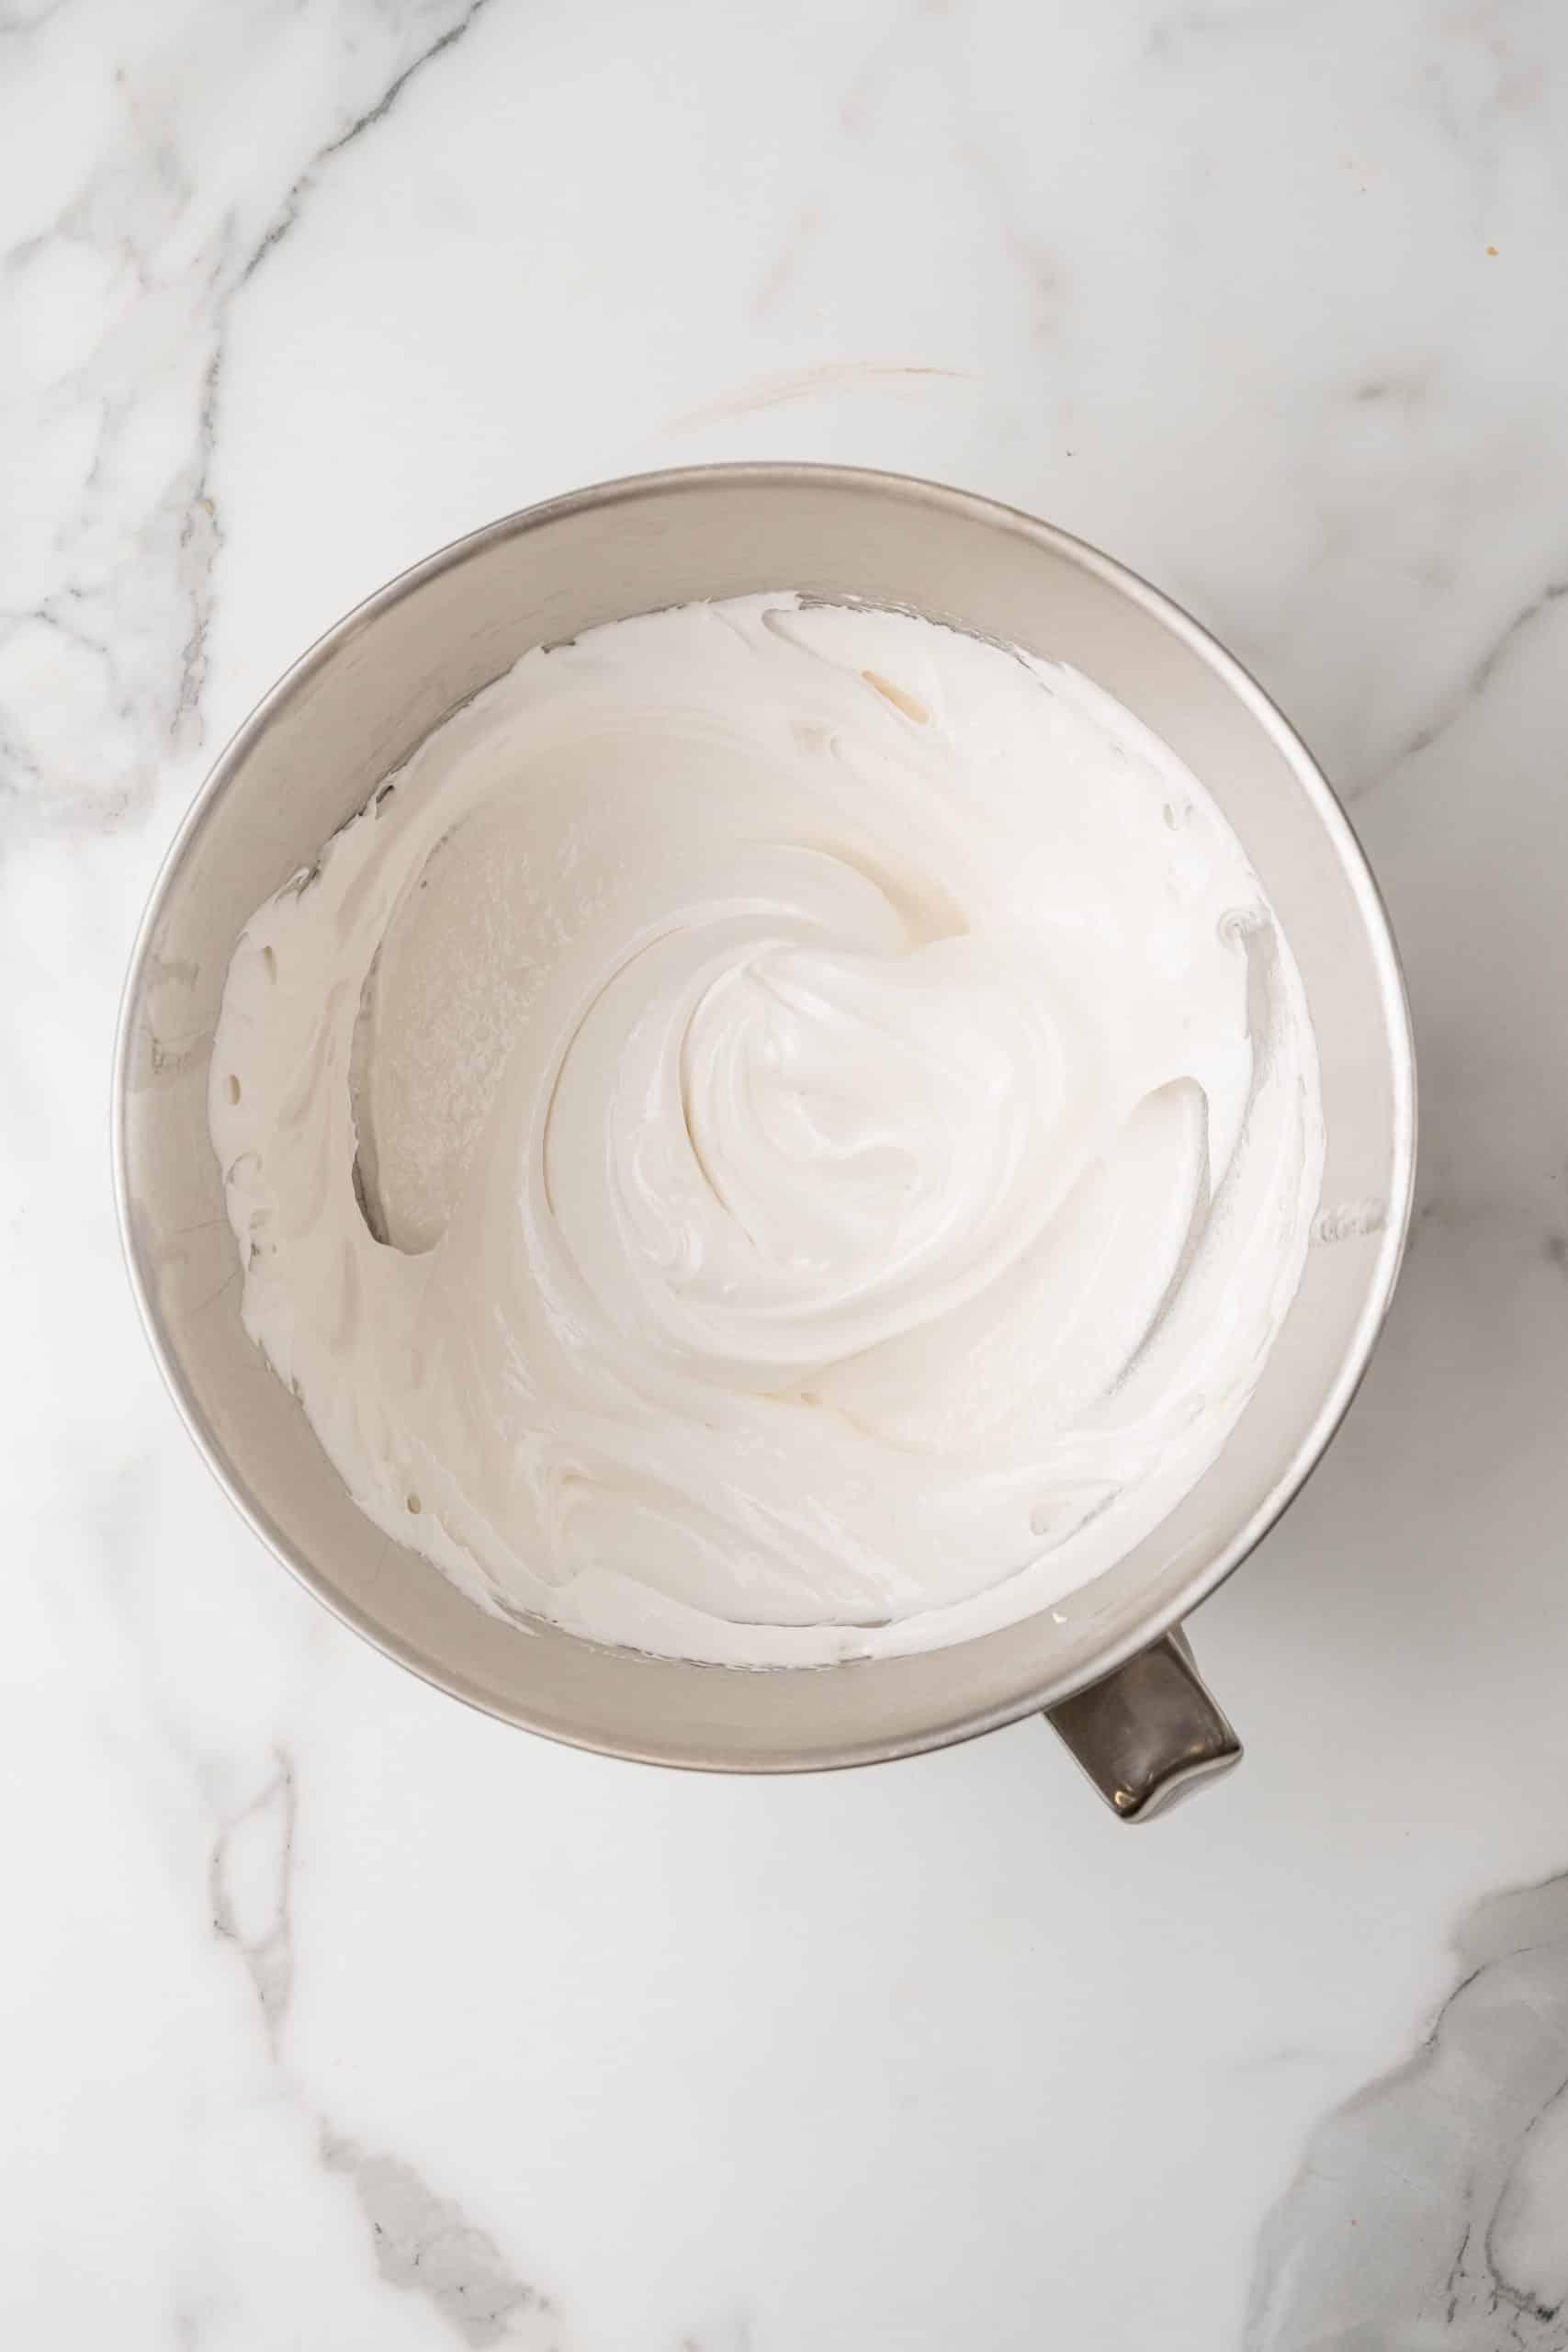 marshmallow fluff frosting in a silver mixing bowl